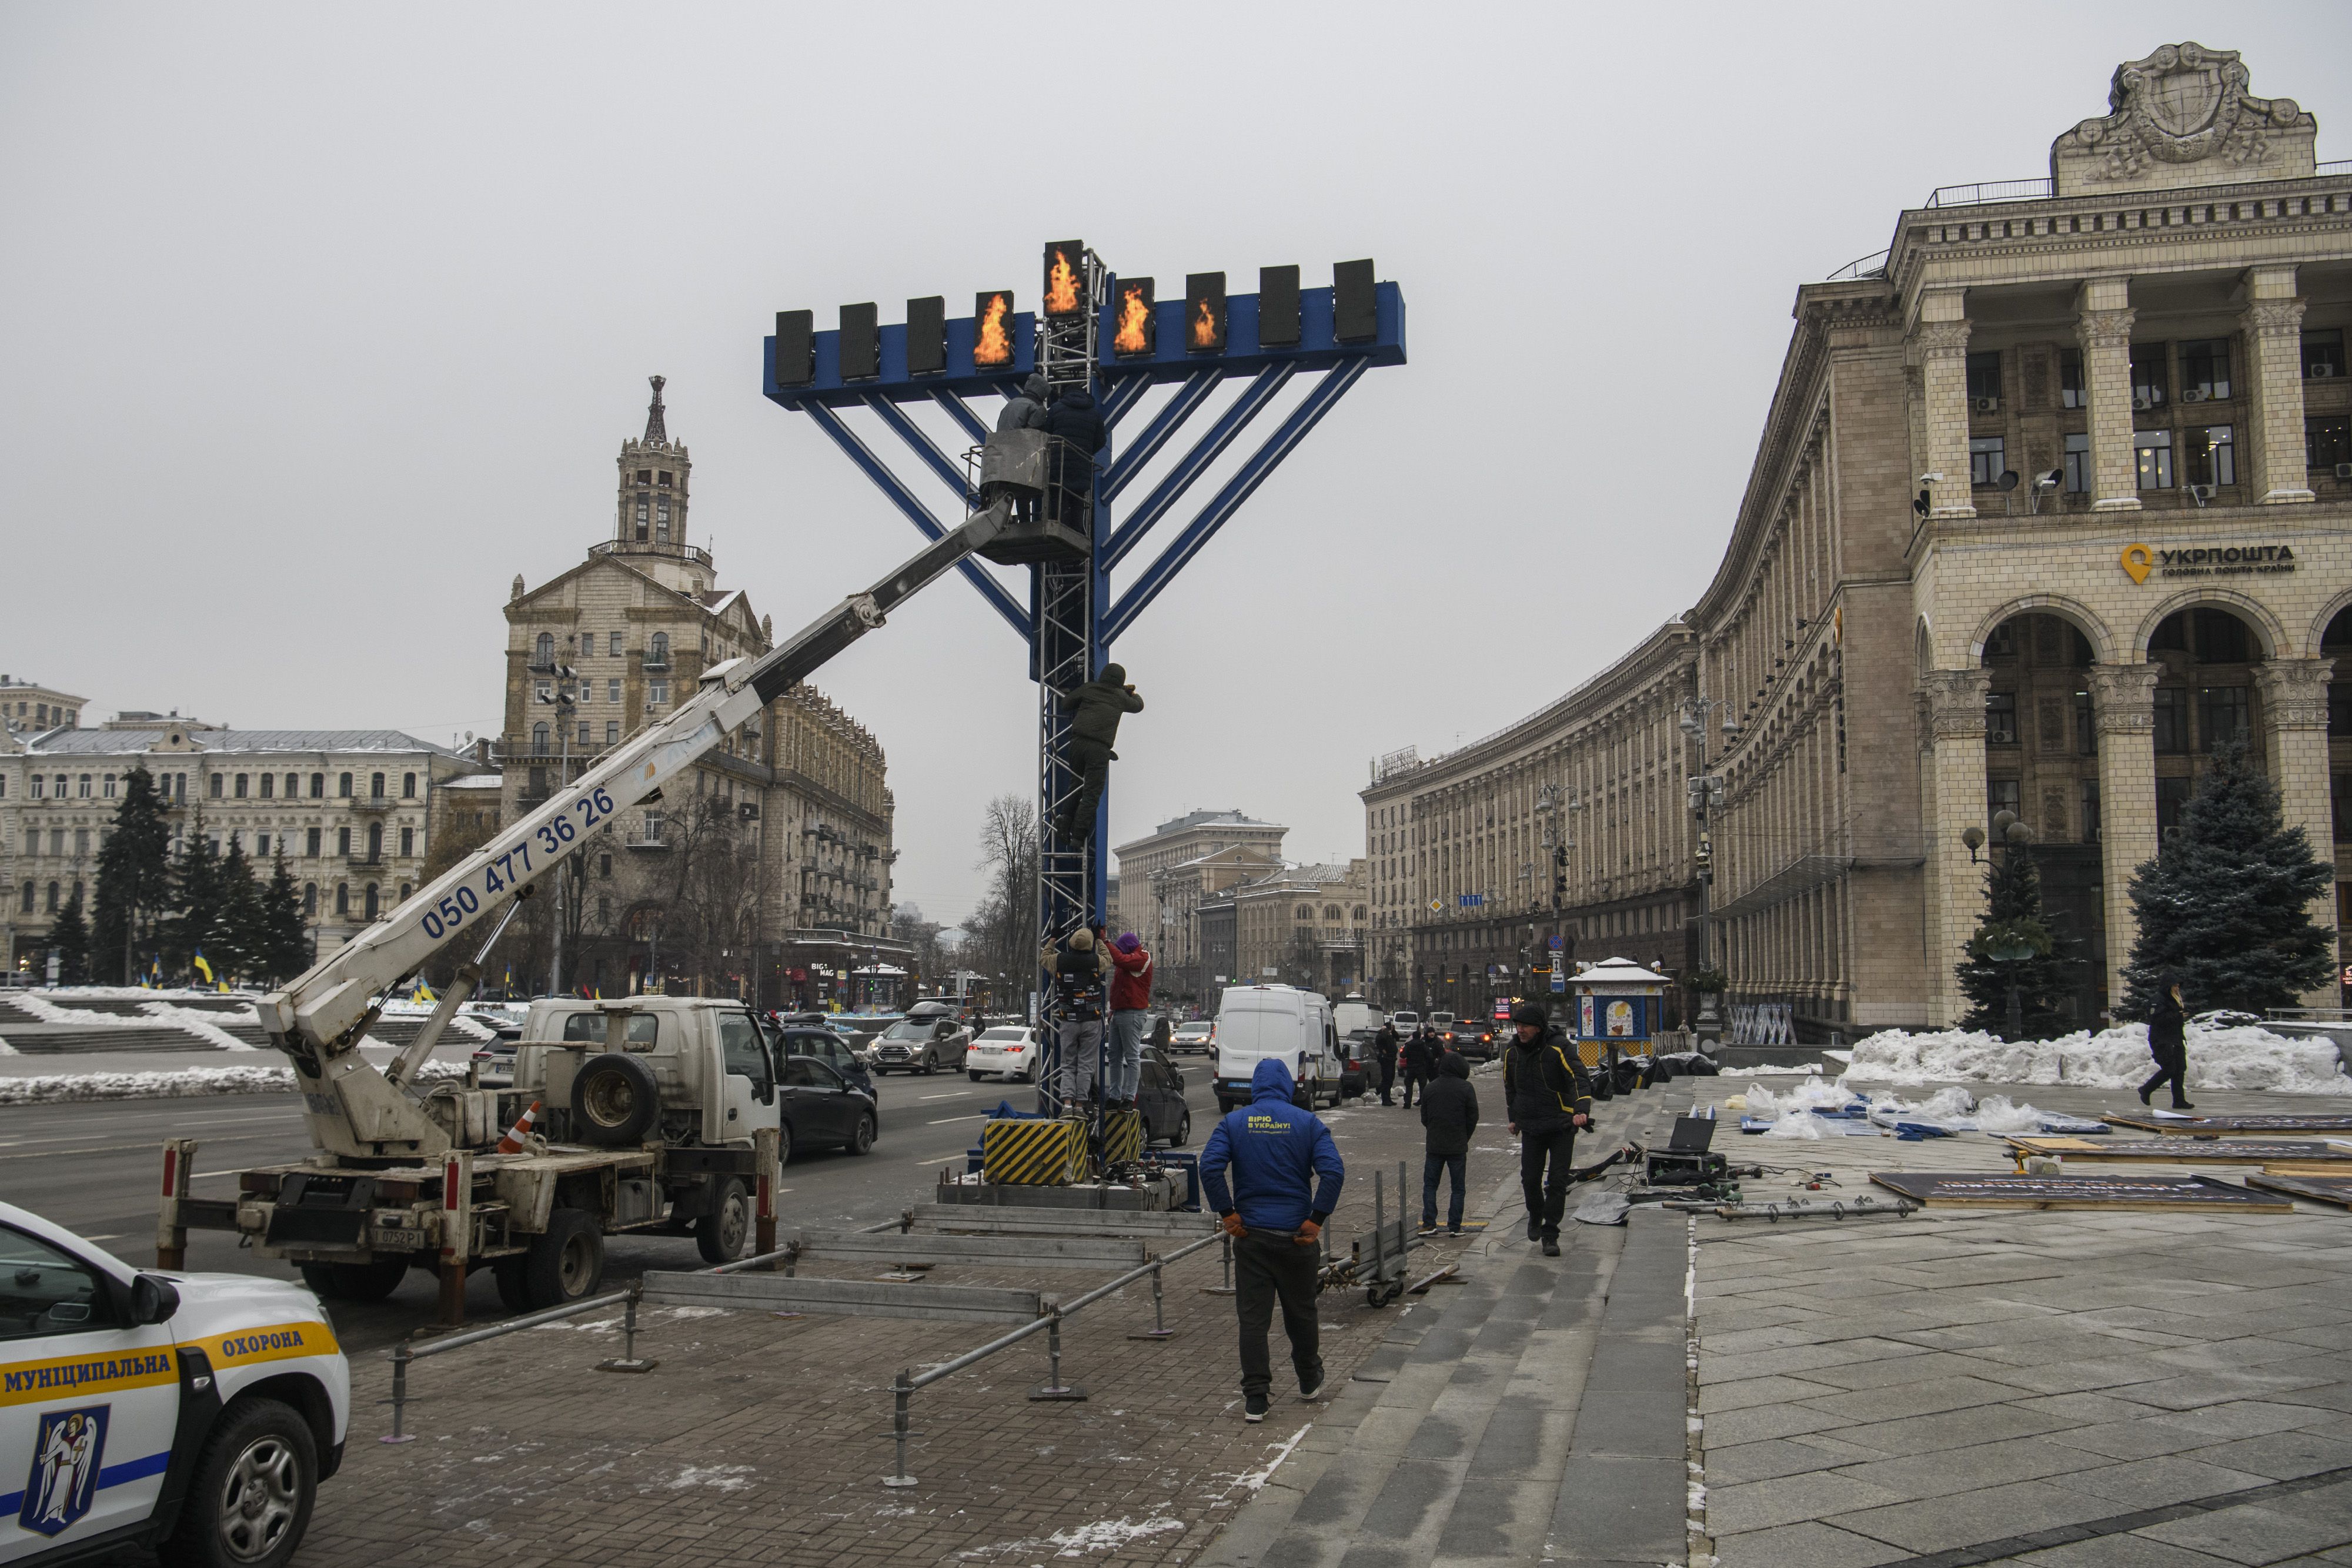 A Hanukkah menorah is installed on Independence Square in Kyiv, Ukraine.